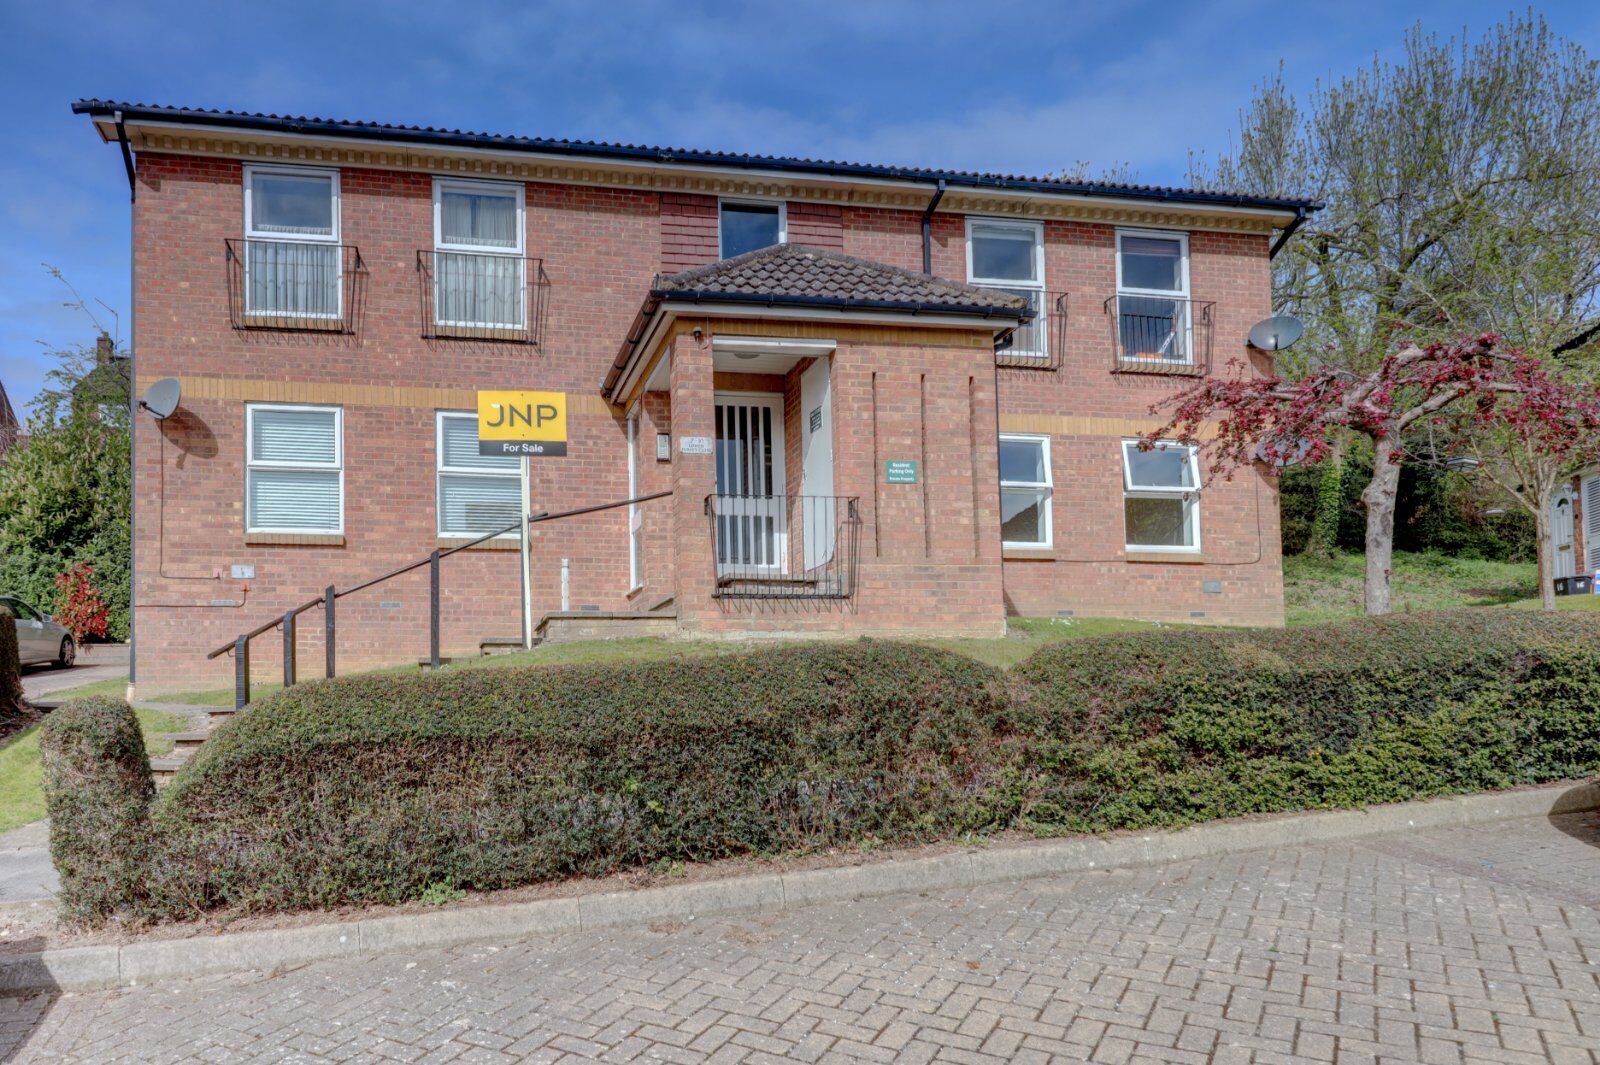 2 bedroom  flat for sale Lower Furney Close, High Wycombe, HP13, main image